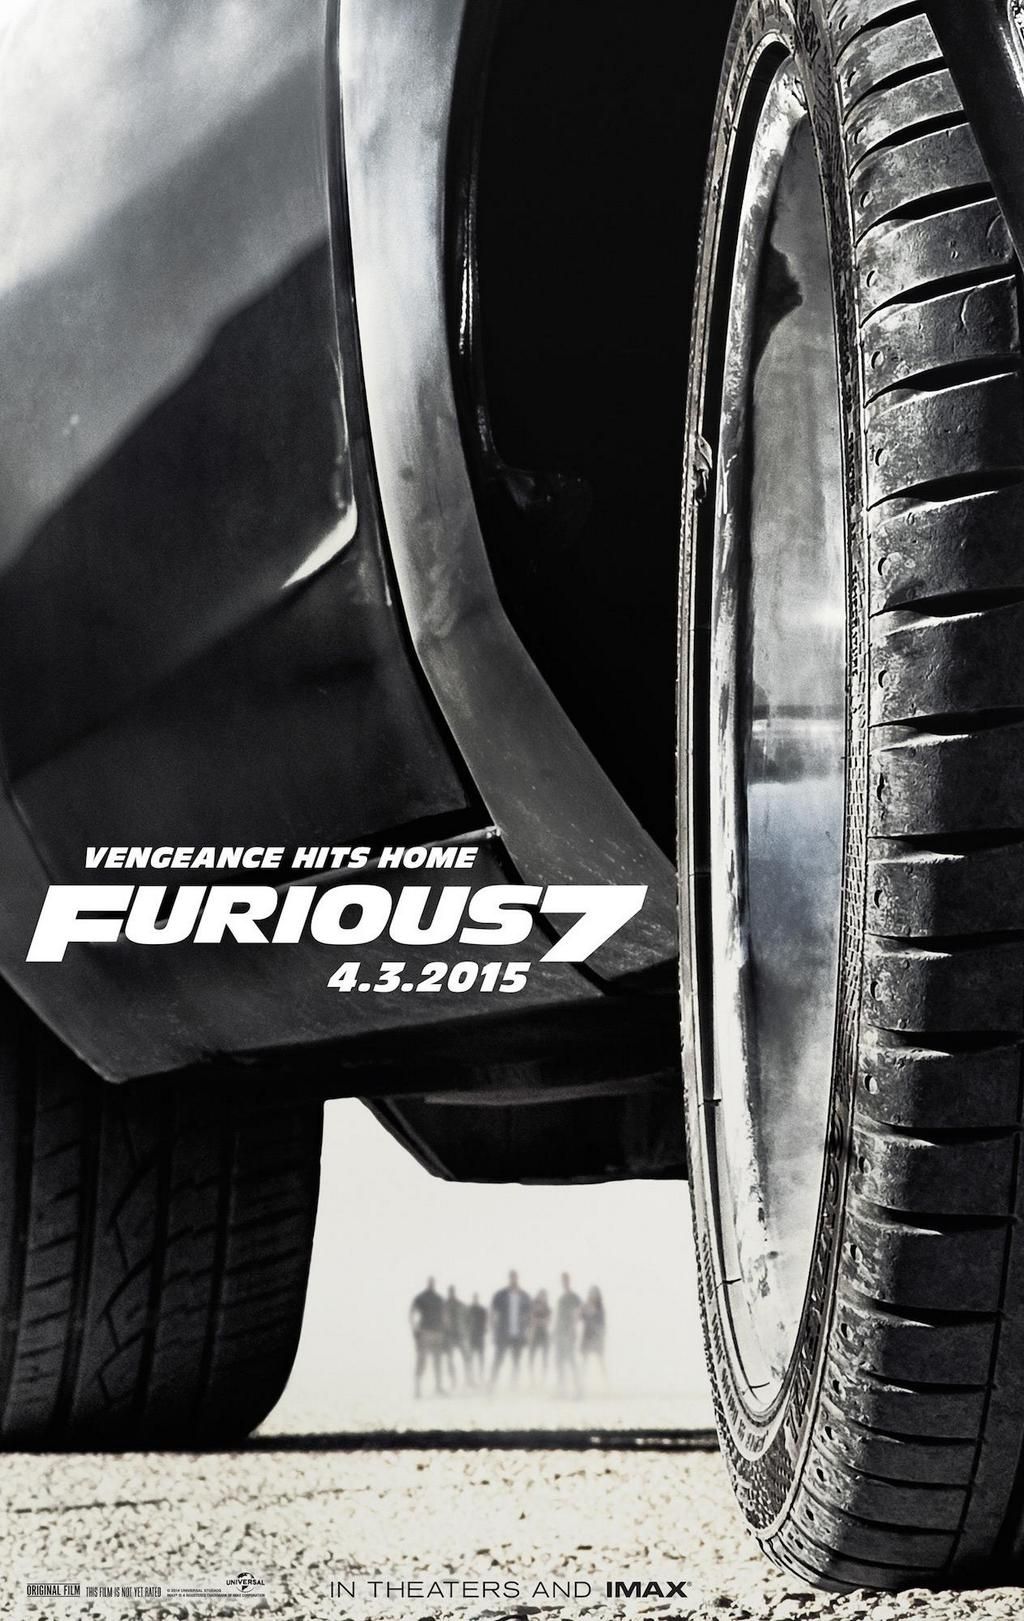 'Furious 7' Trailer: Jason Statham Goes to War with the Family. | Collider1024 x 1621